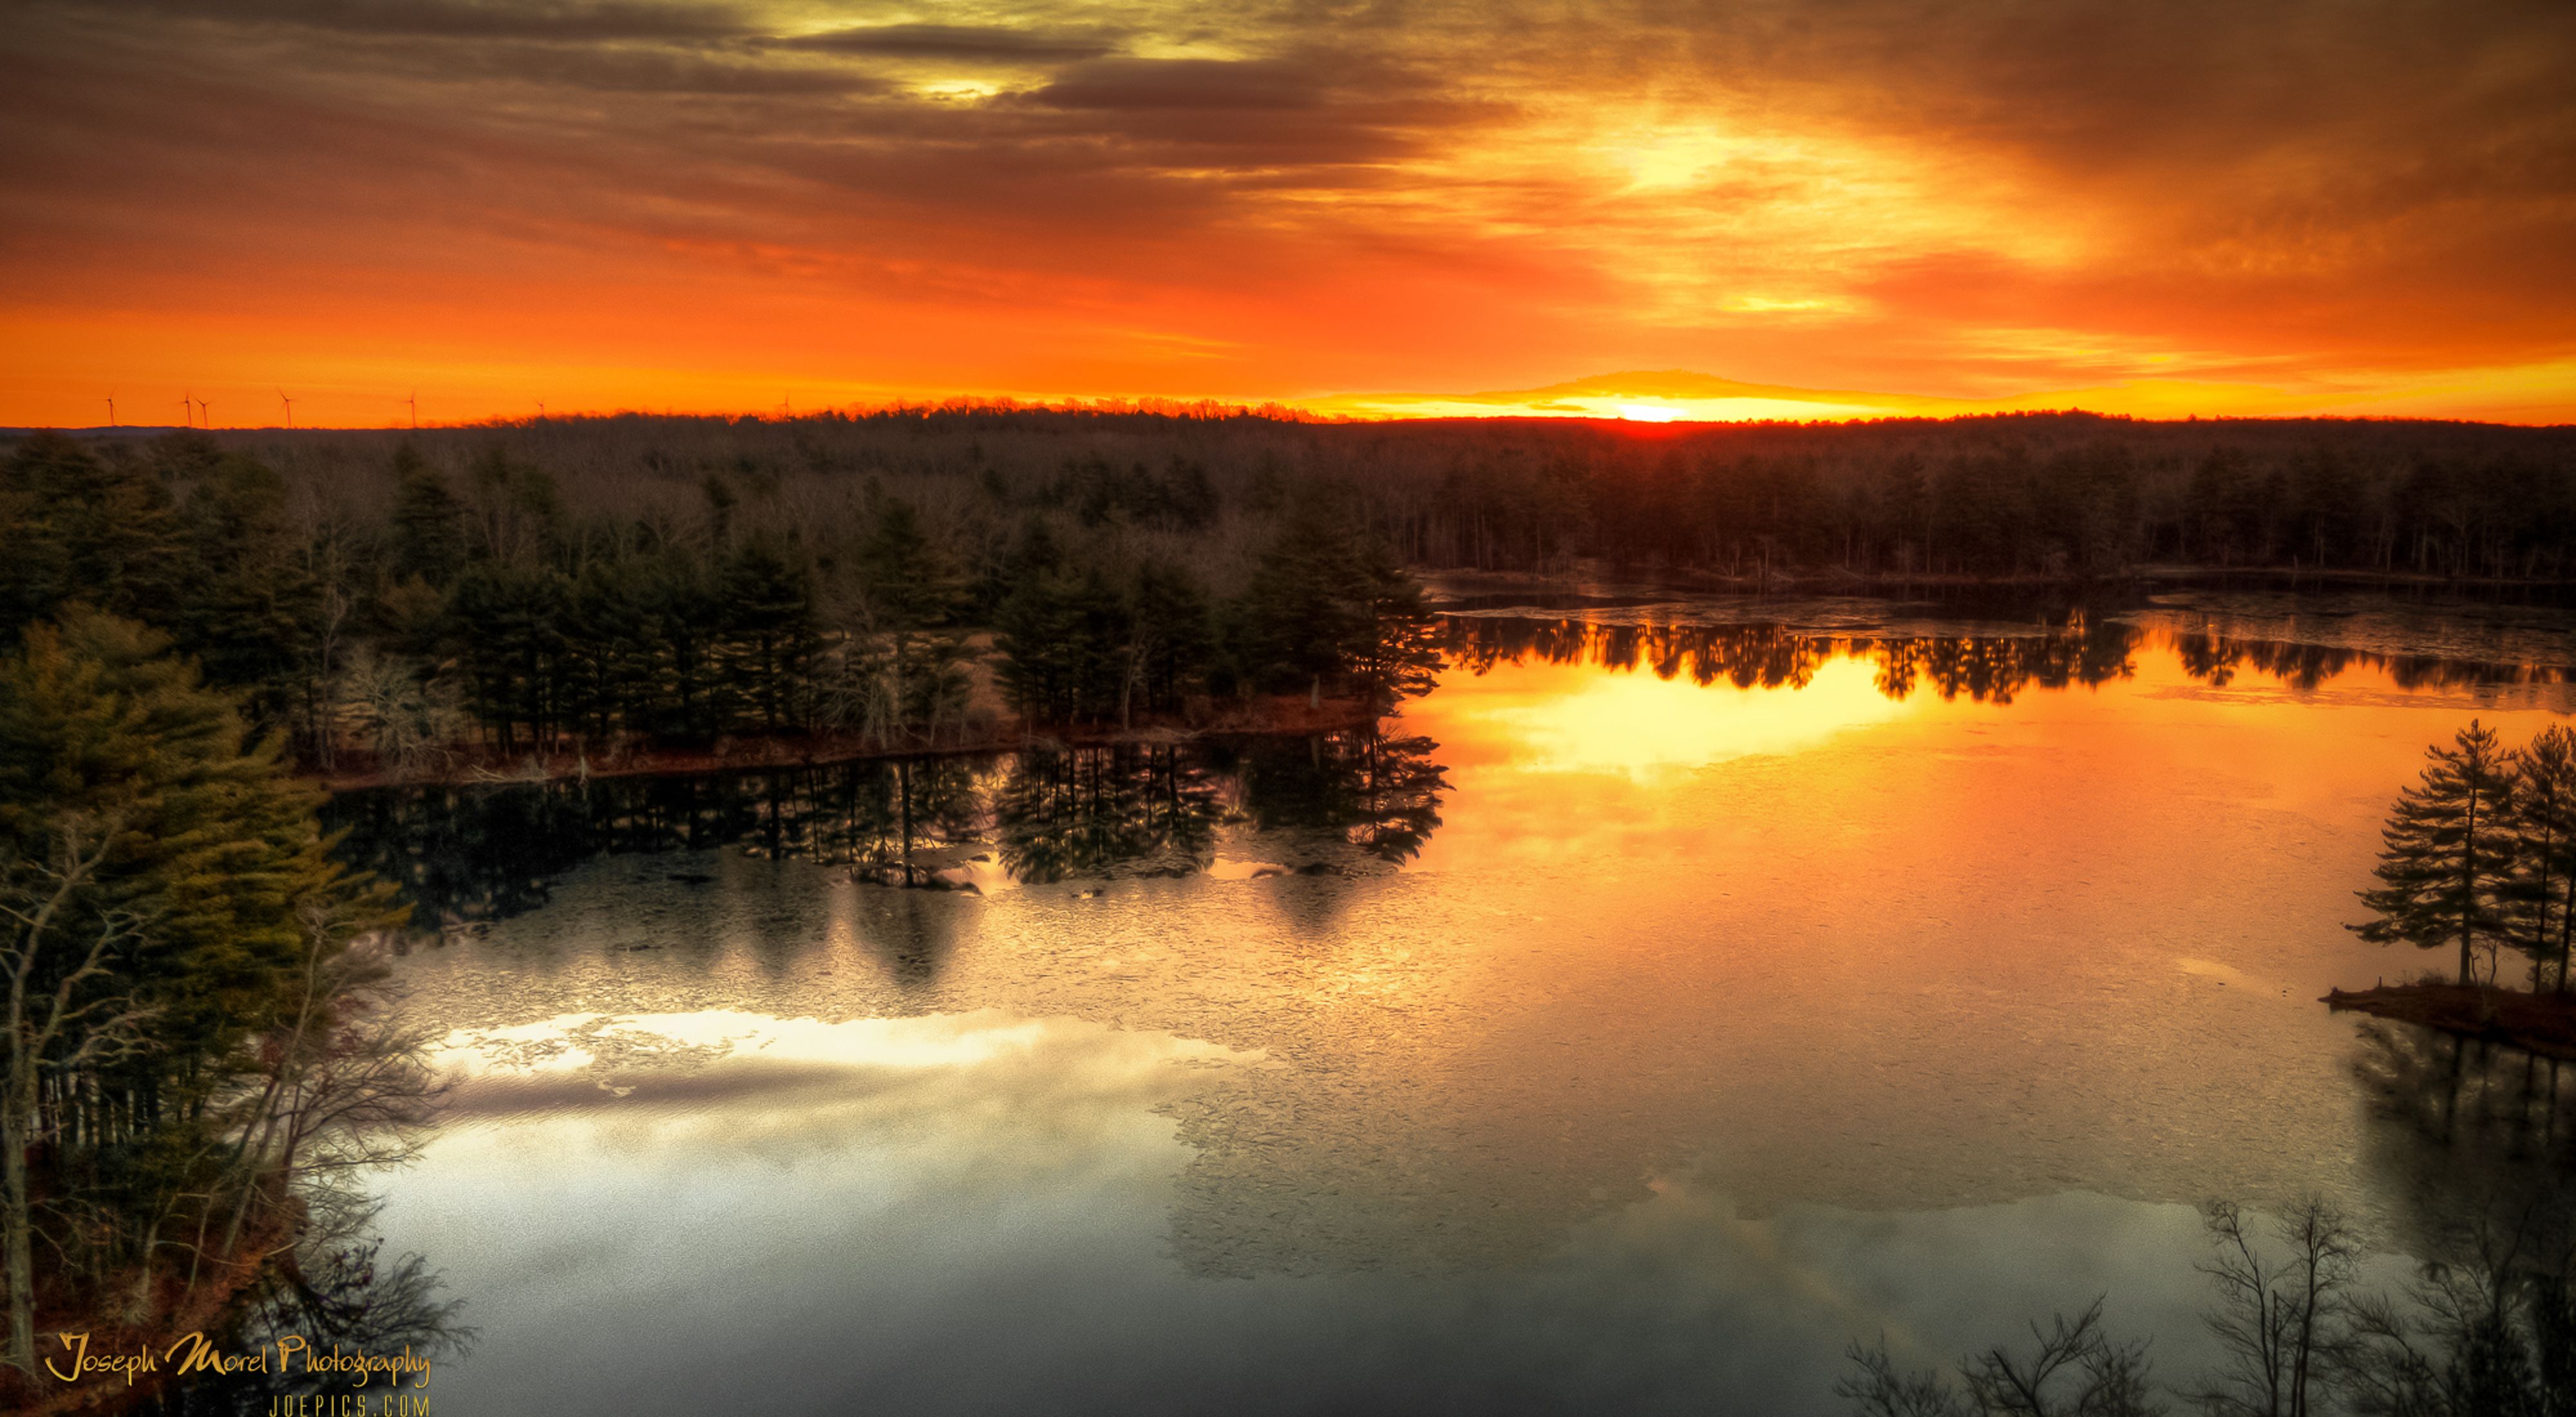 The sun breaks over the horizon and orange skies are reflected in a pond below, ringed by pine trees. 